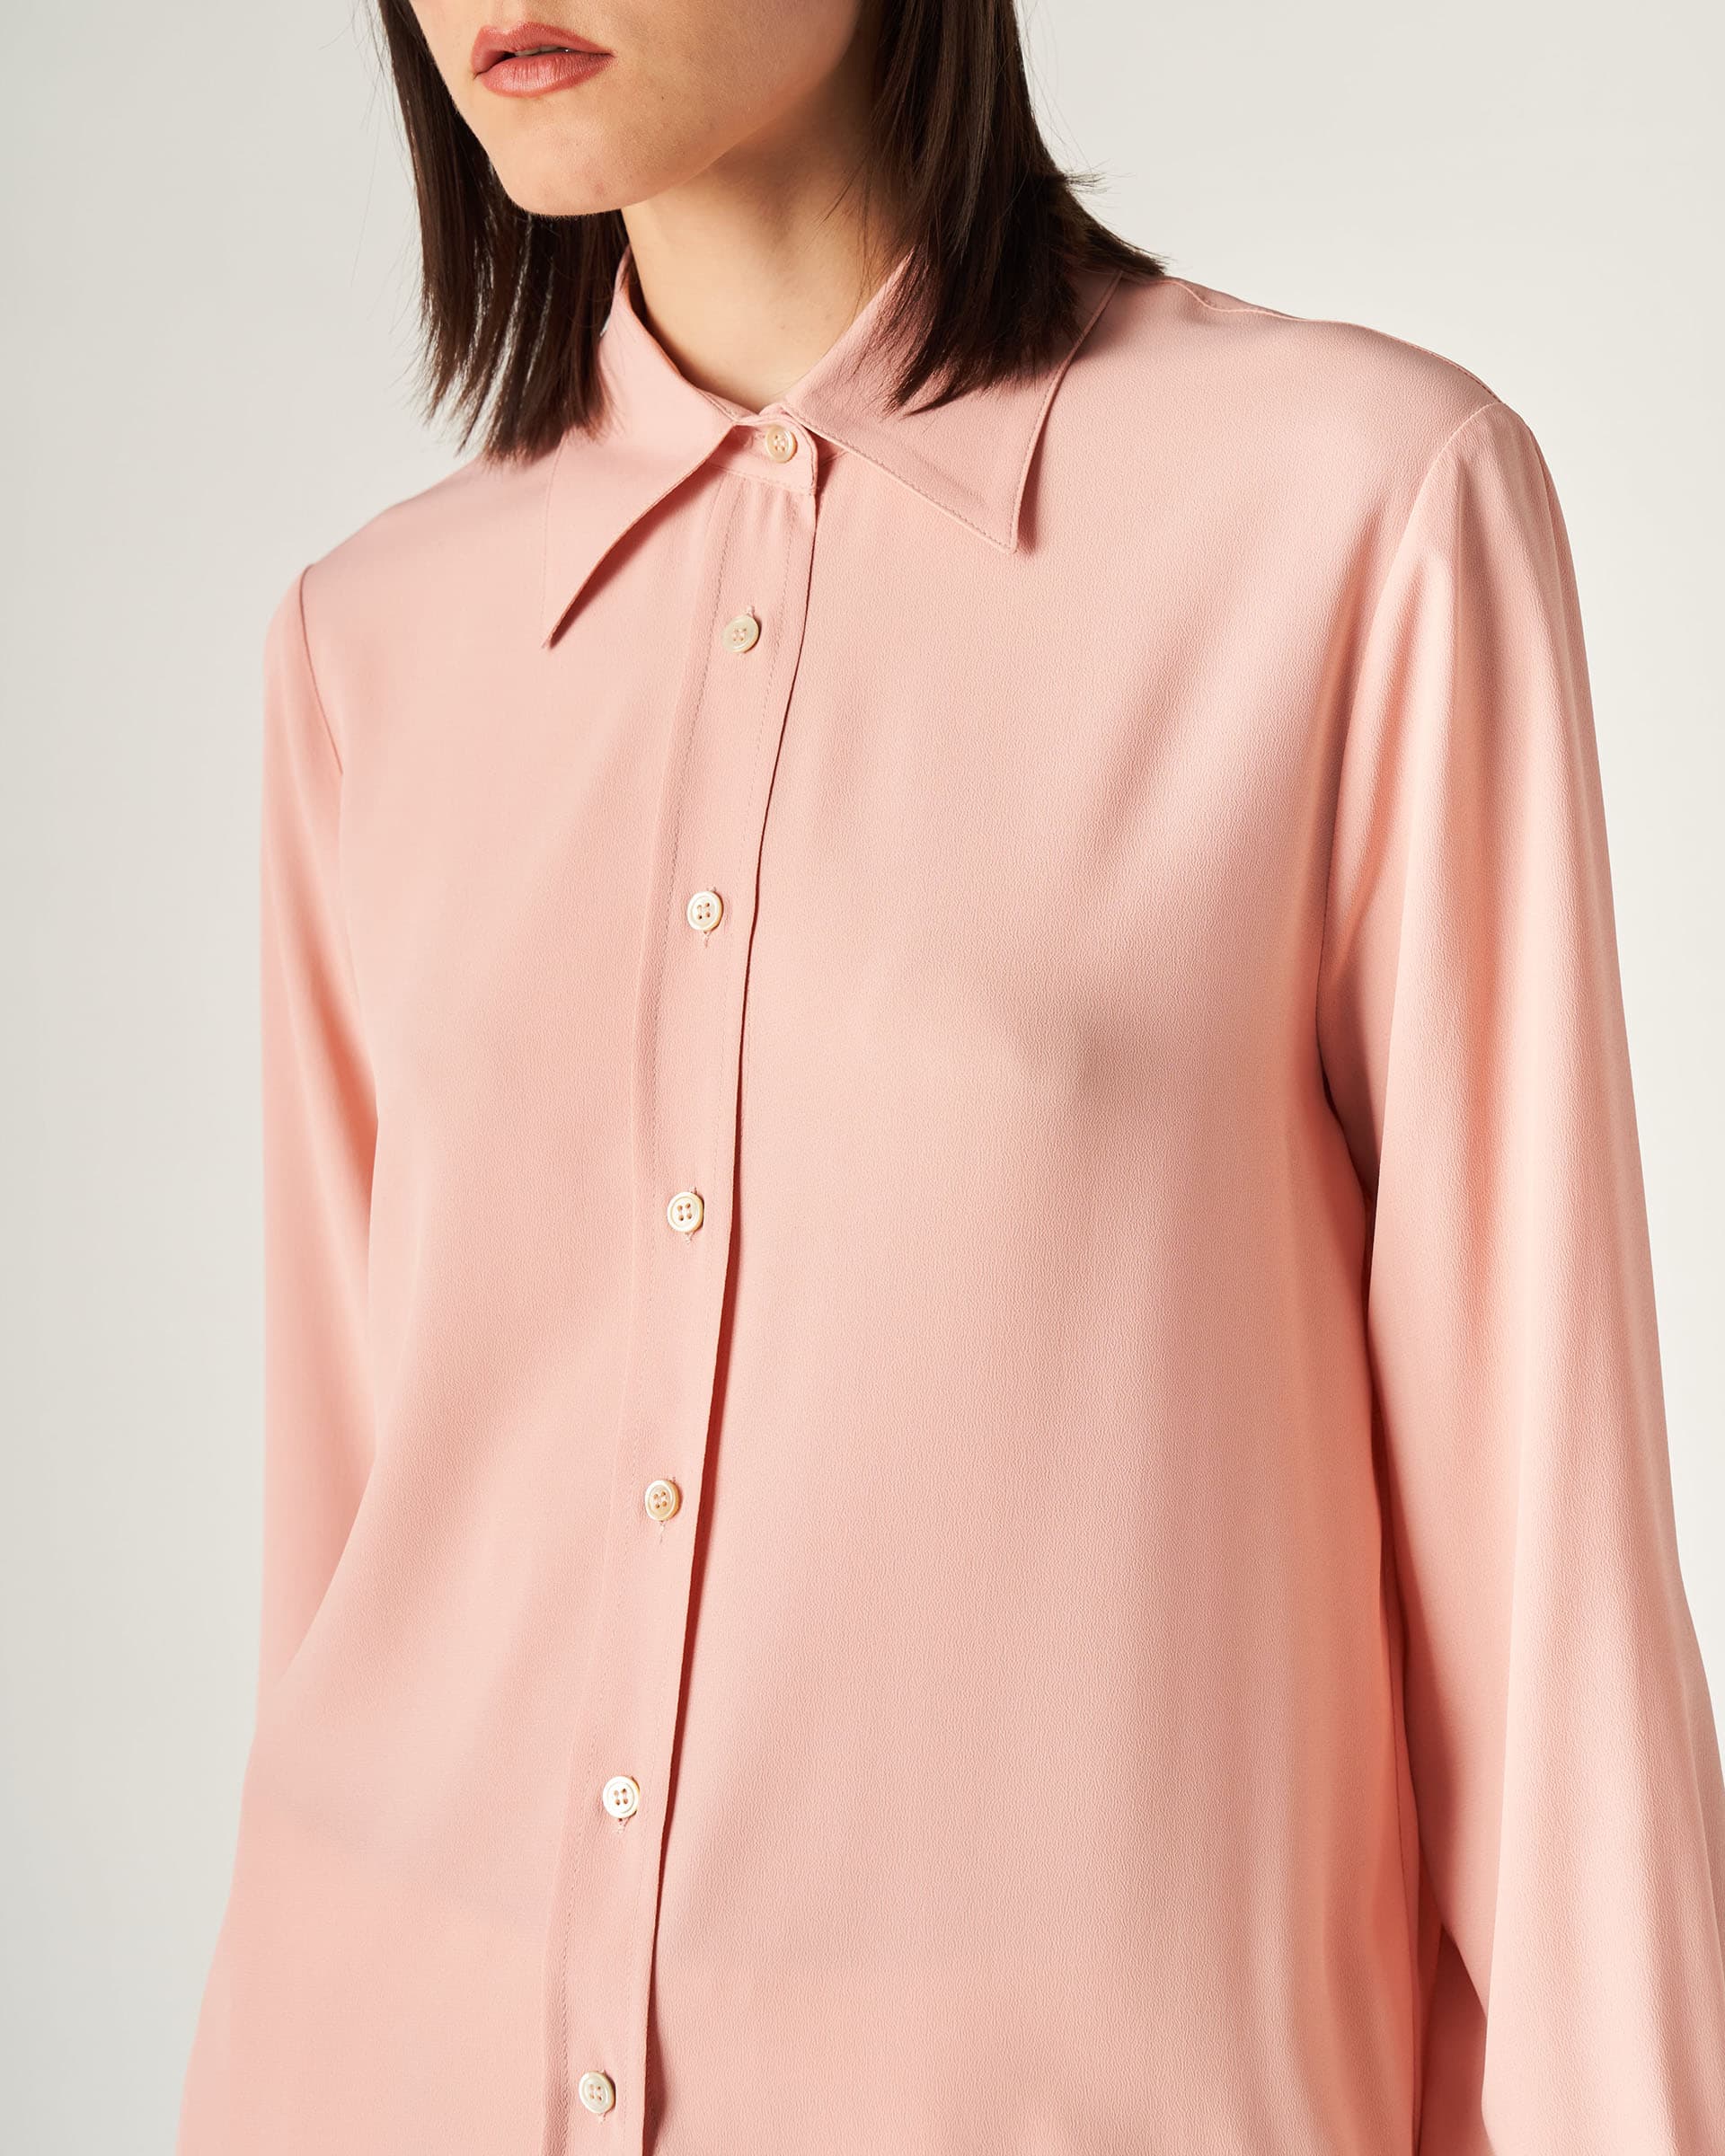 The Market Store | Shirt With Collar